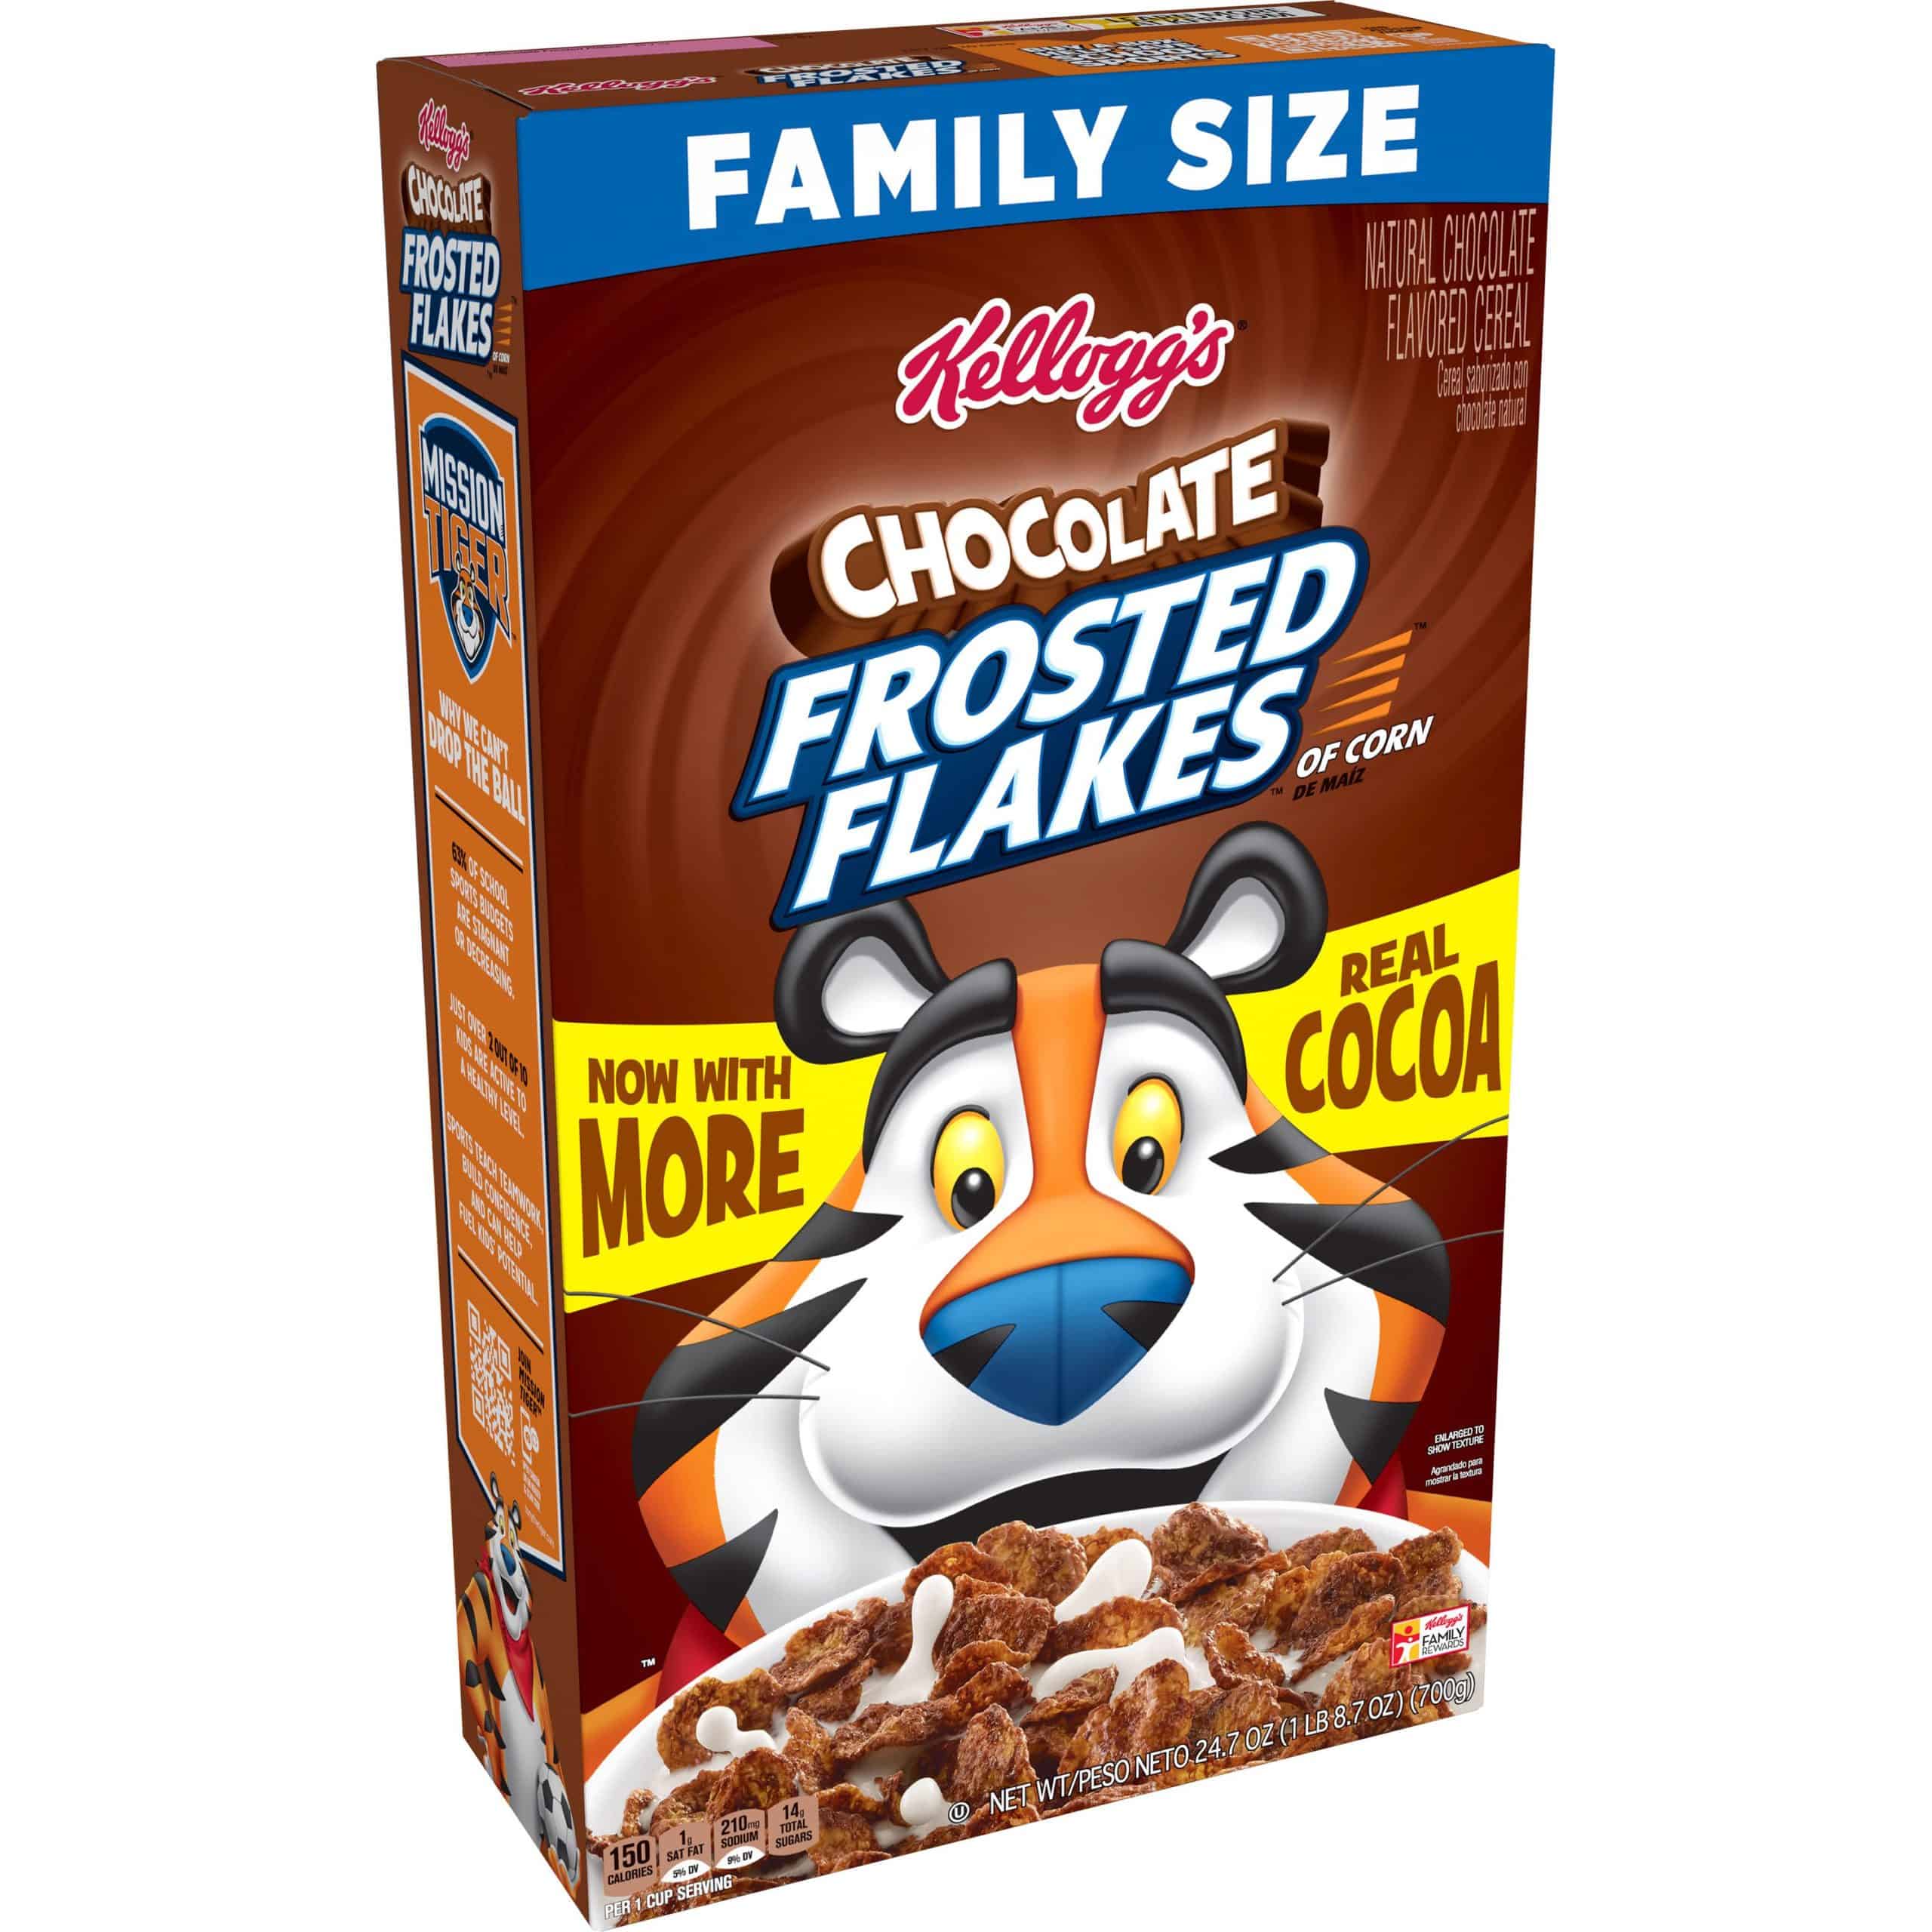 Kellogg's Frosted Flakes, Chocolate, Family Size, 24.7 Oz